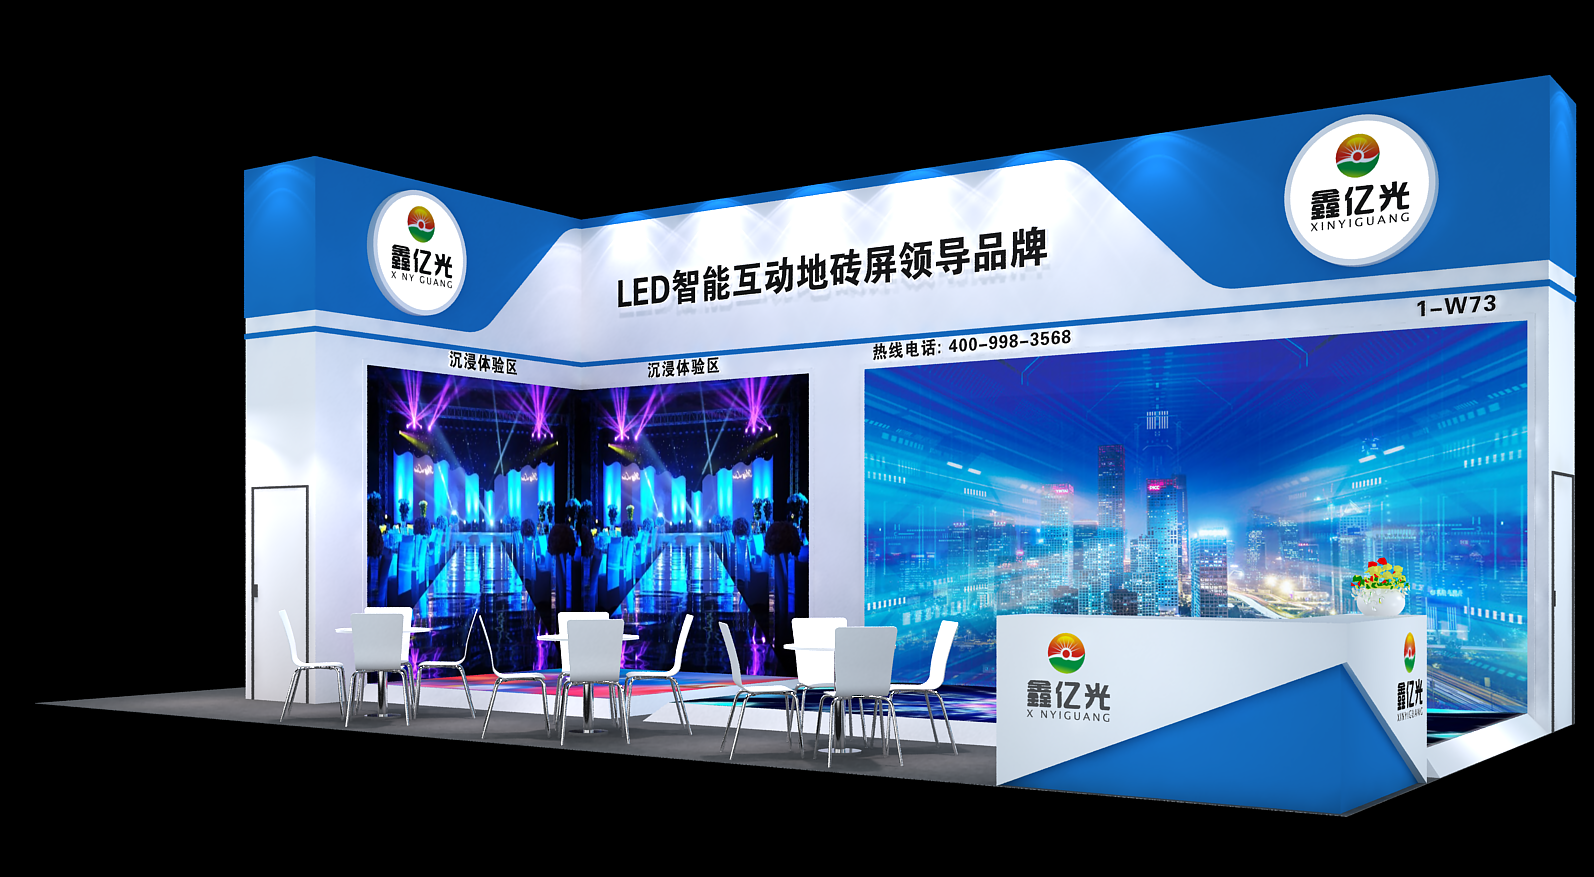 LED CHINA 2023 will once again focus on the “Countdown”, so stay tuned~